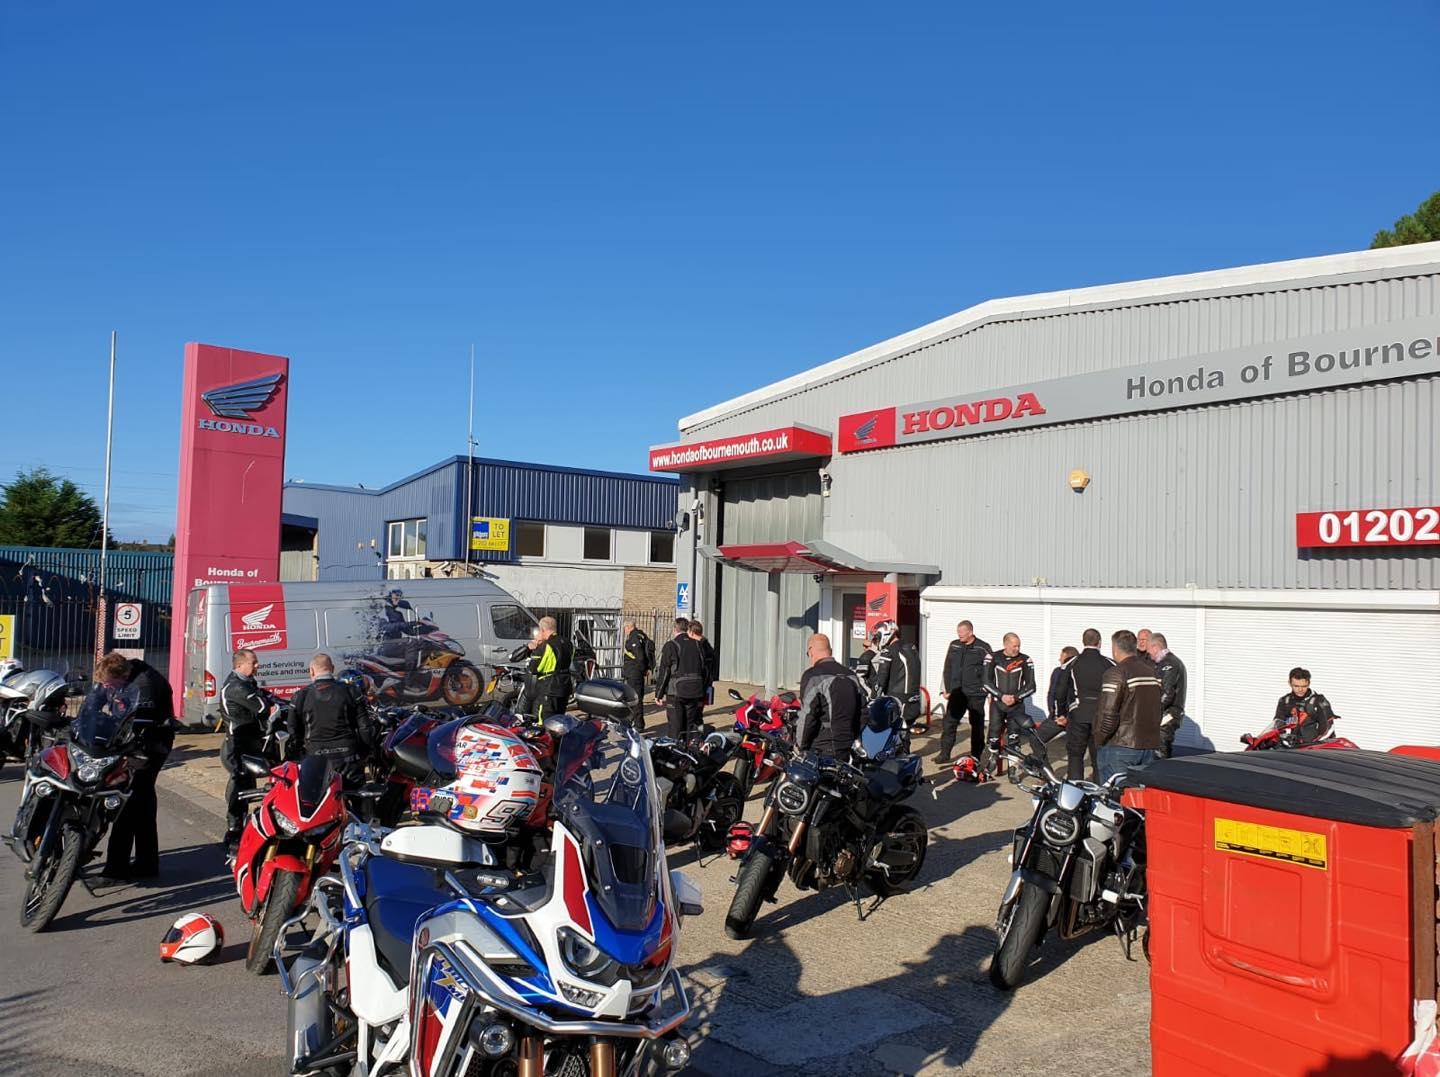 Book your CBT Test in Bournemouth with Honda of Bournemouth, Motorcycle Training in Dorset